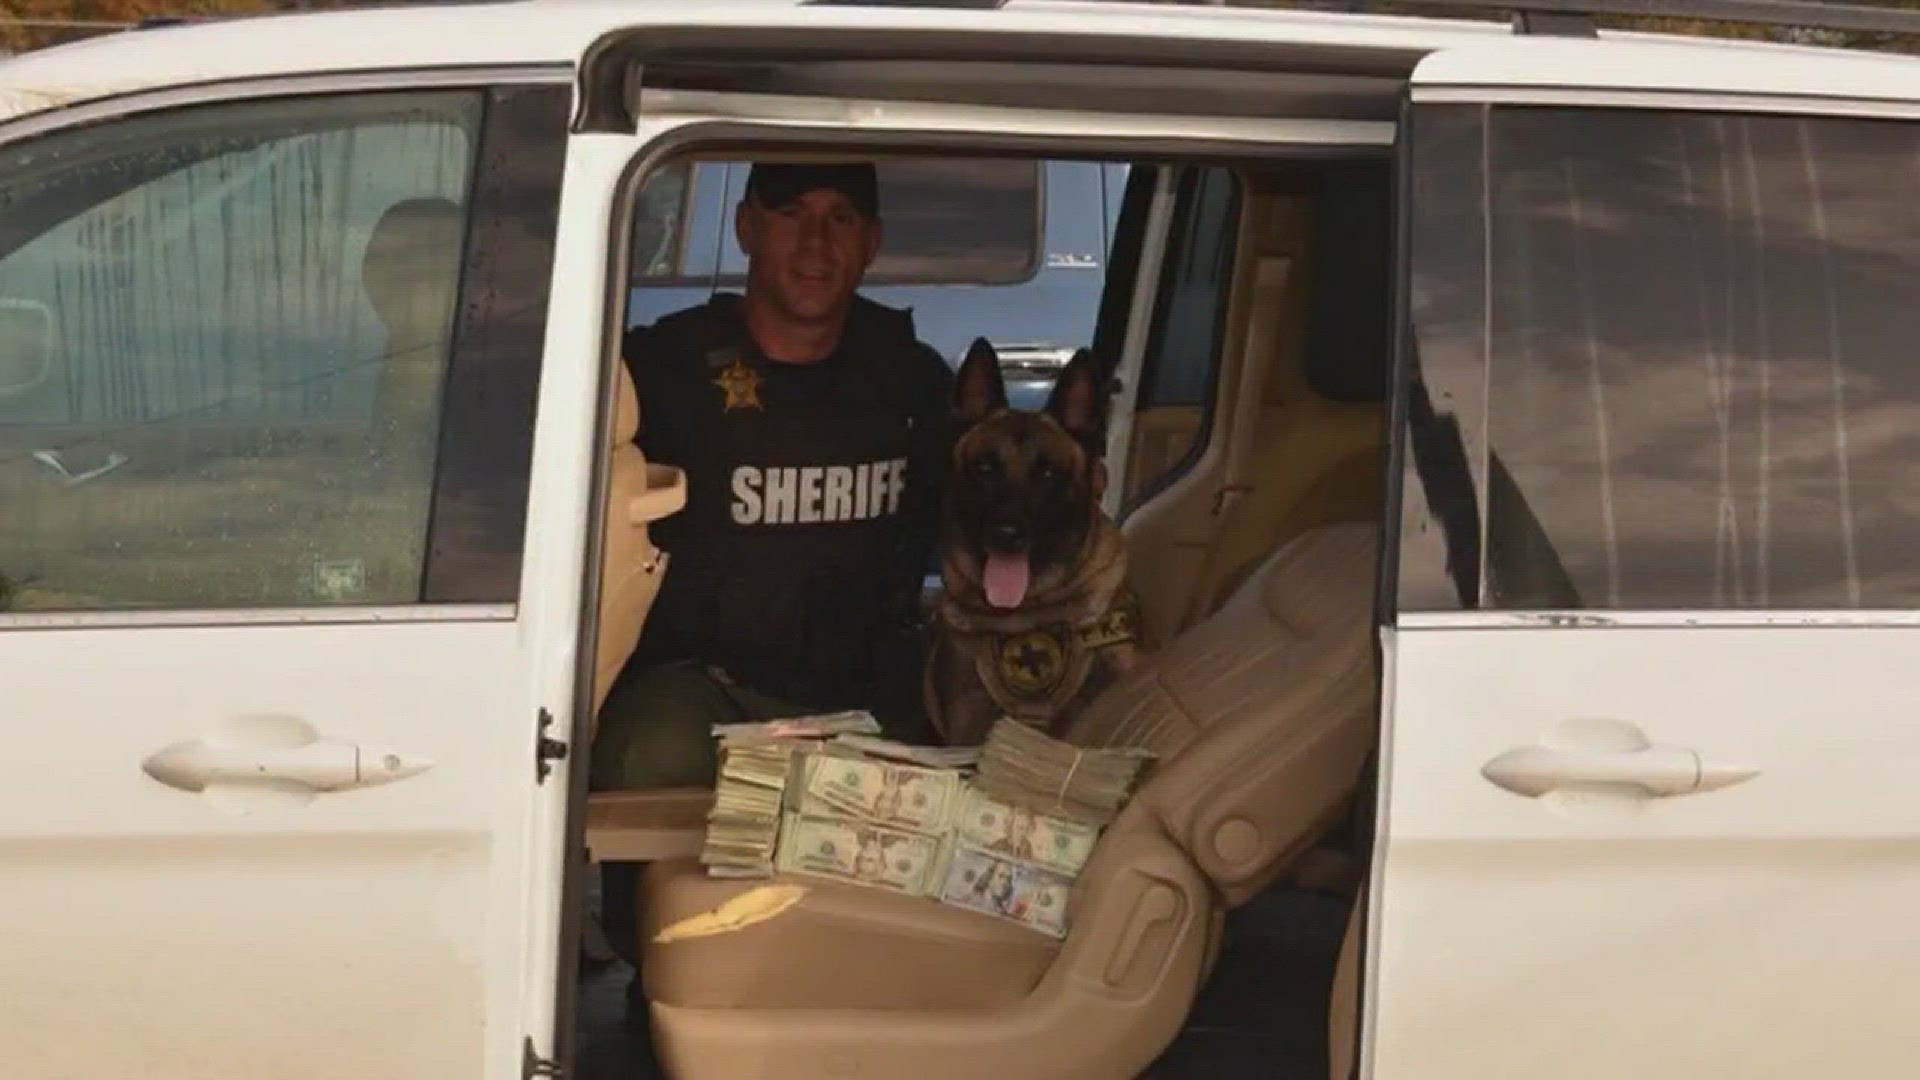 If you live in Central Texas you've likely heard of Lobos the drug dog.